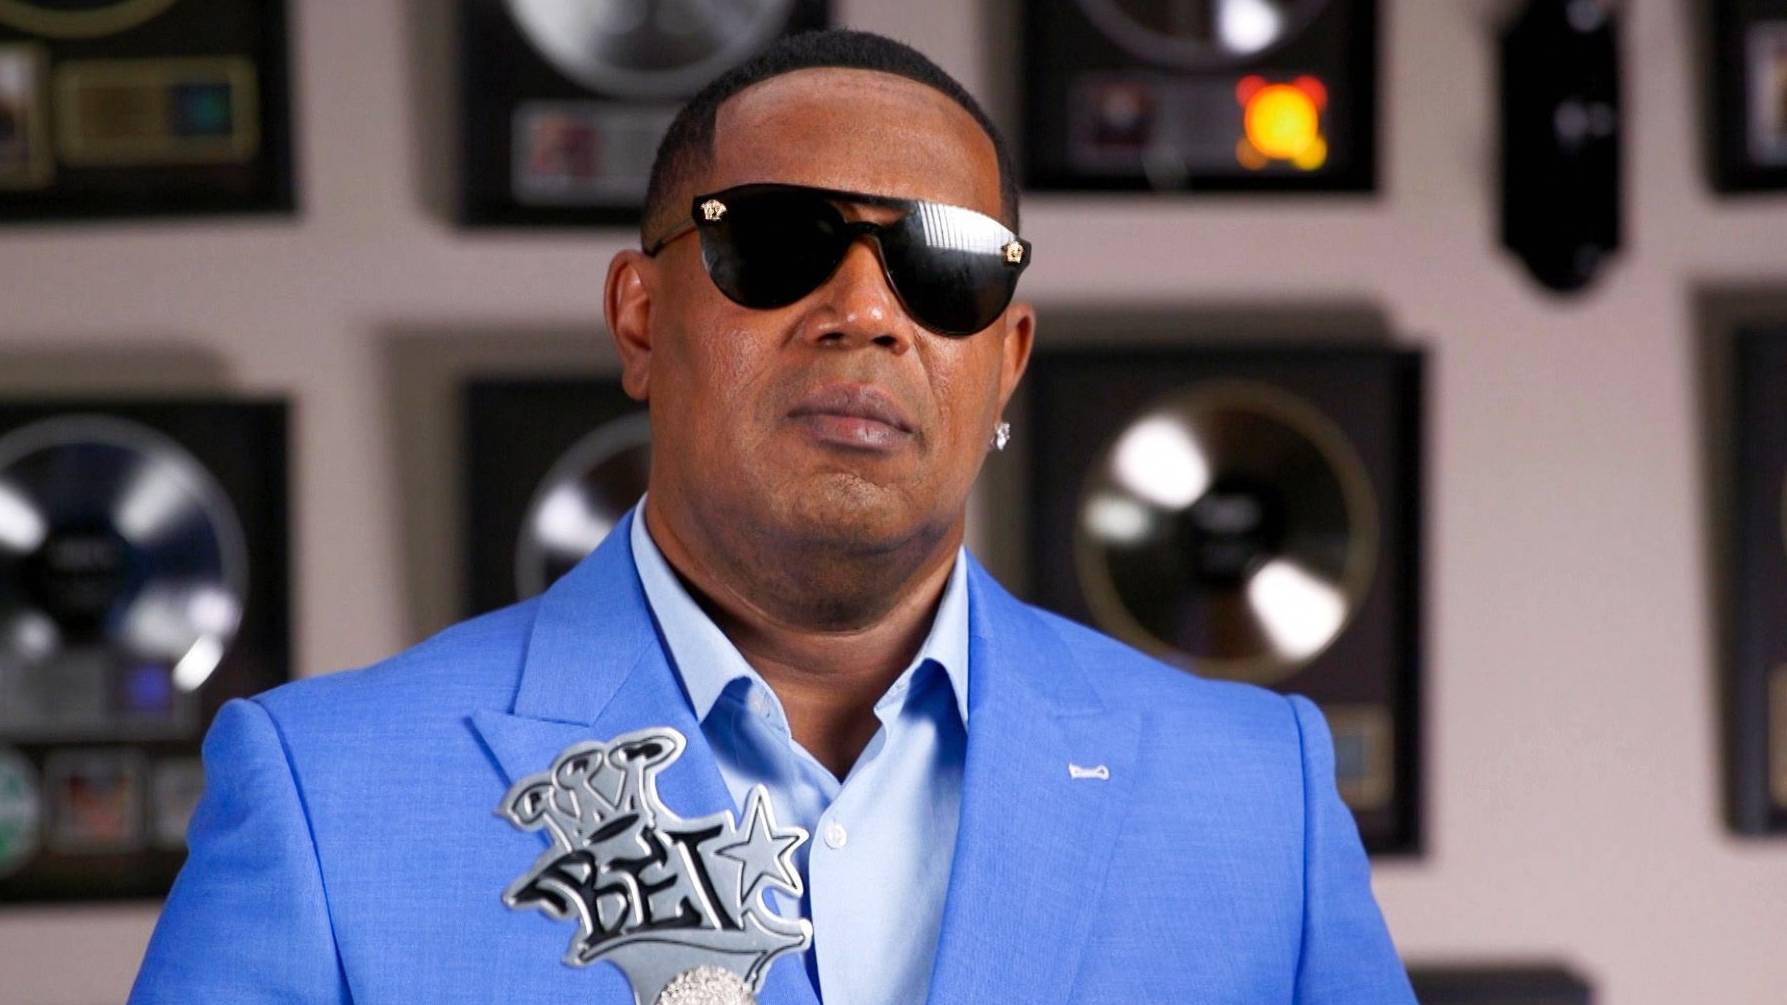 Screen grab released Oct. 27, of Master P accepting the I Am Hip Hop award for the BET Hip Hop Awards 2020. 
